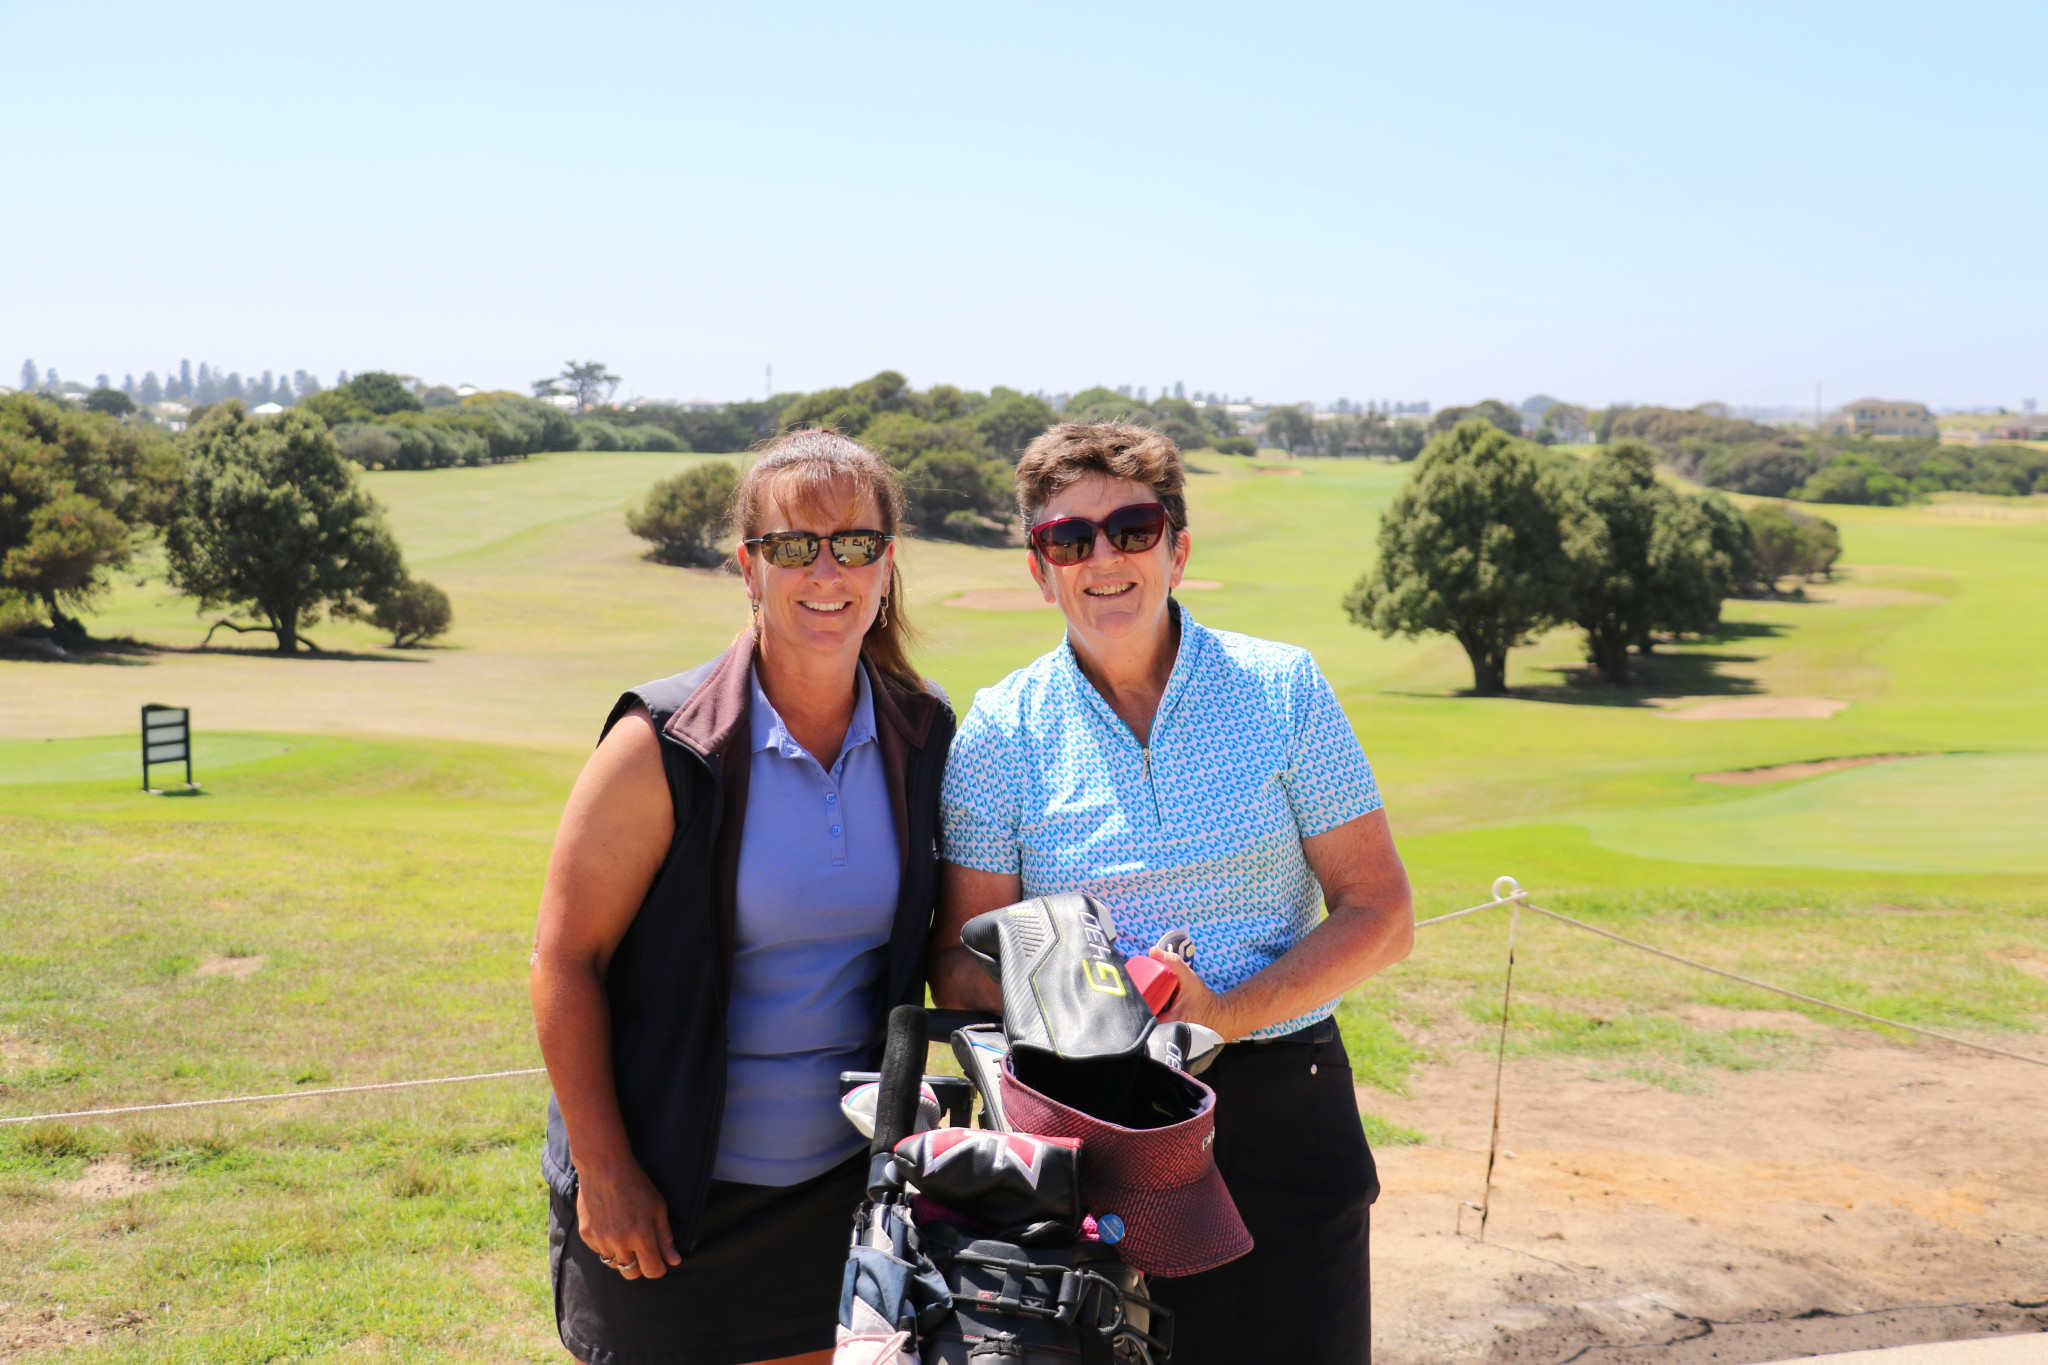 Camperdown’s Tracey Baker and Liz Fry competed in the Marjorie Robinson Bowl at Warrnambool.